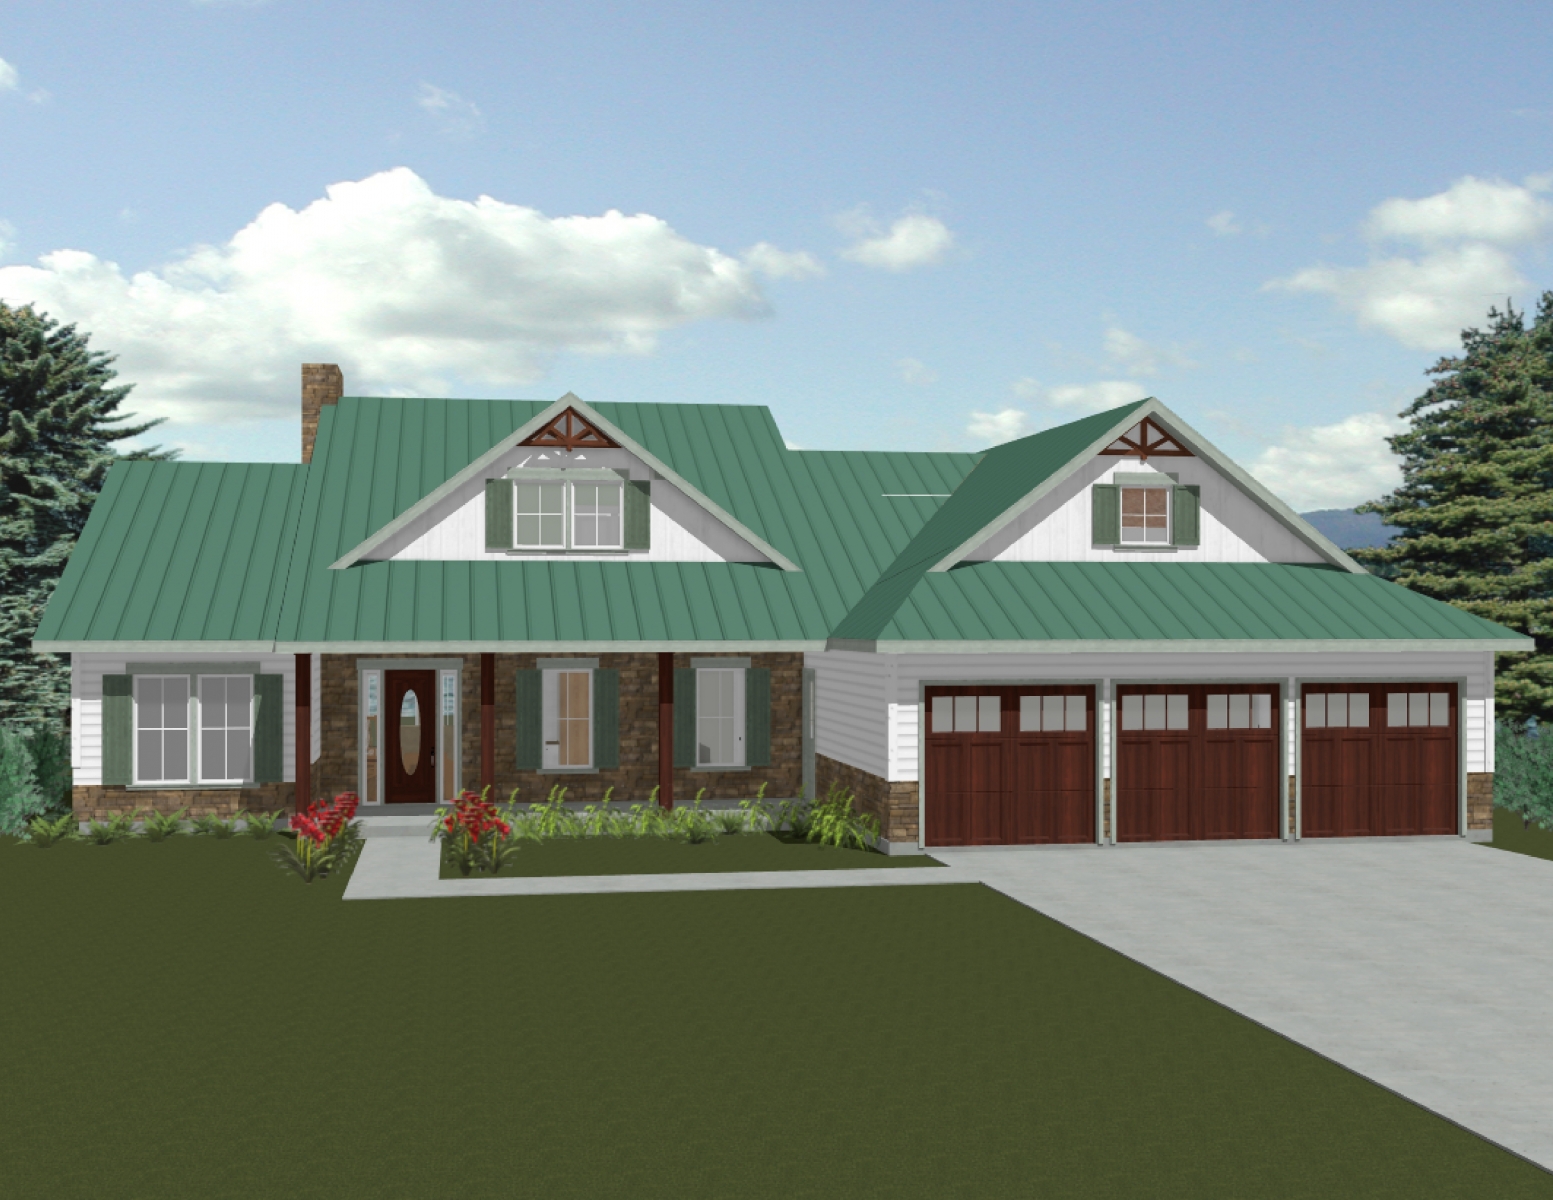 3D exterior rendering of a modern, white farmhouse with a green roof and three car garage.